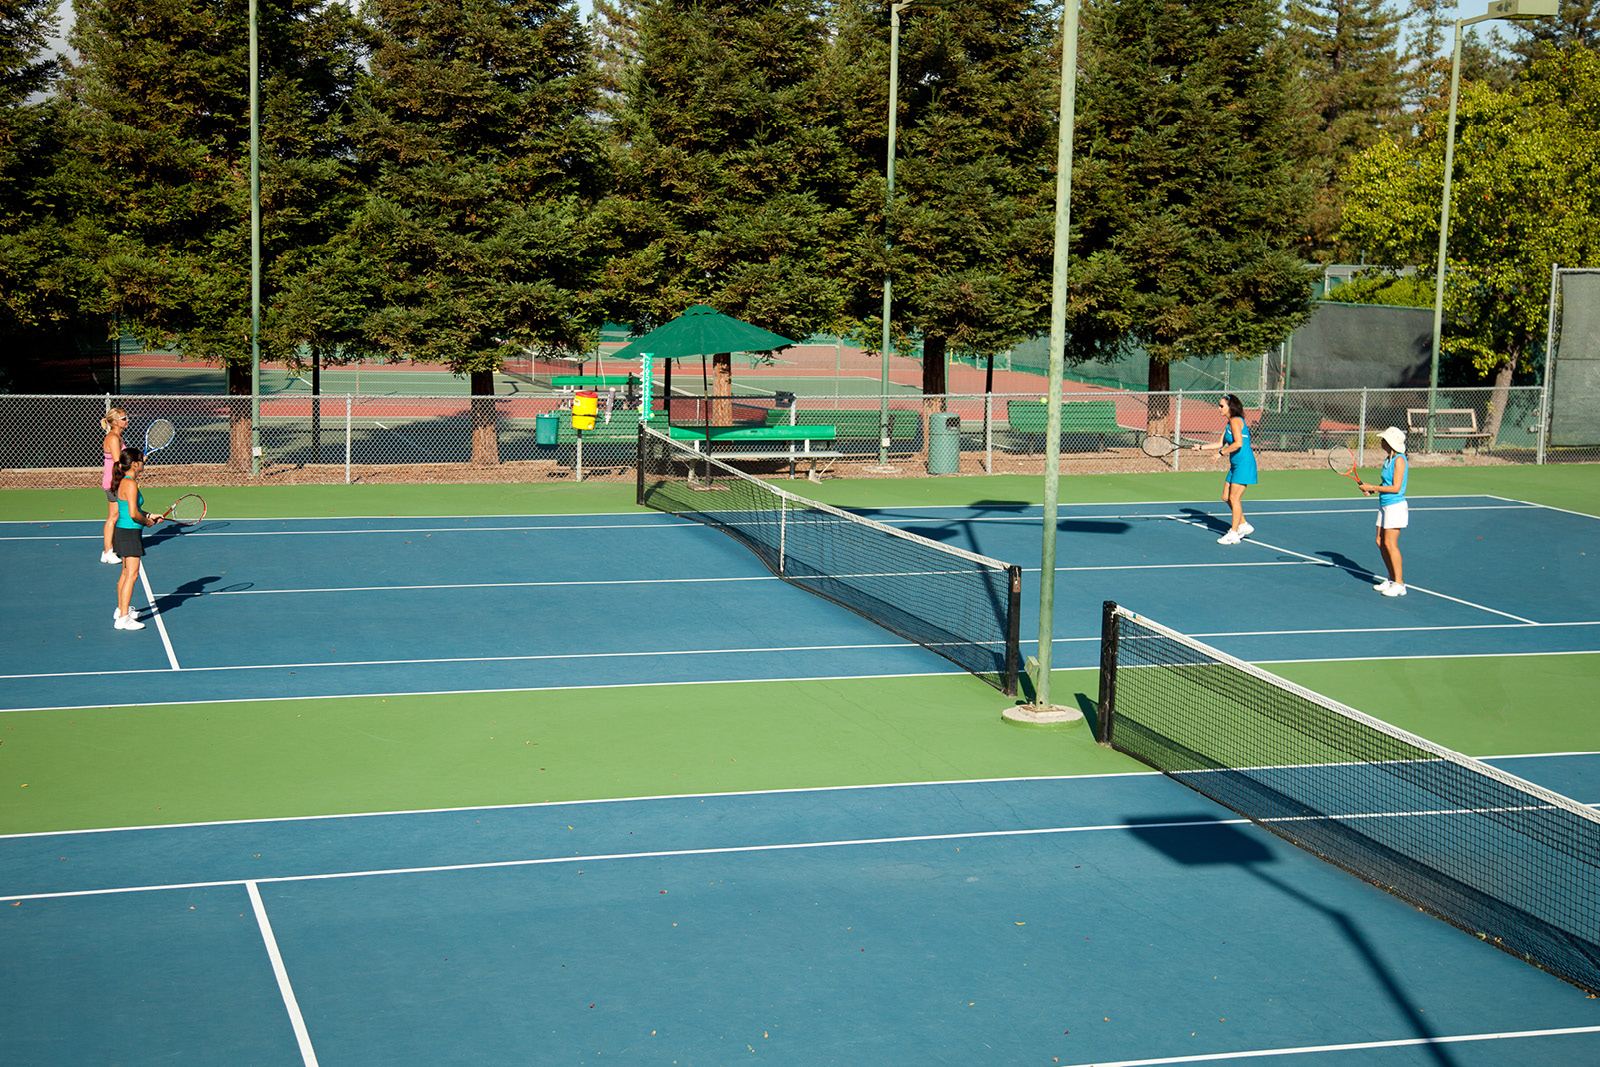 People playing tennis on the outdoor tennis courts